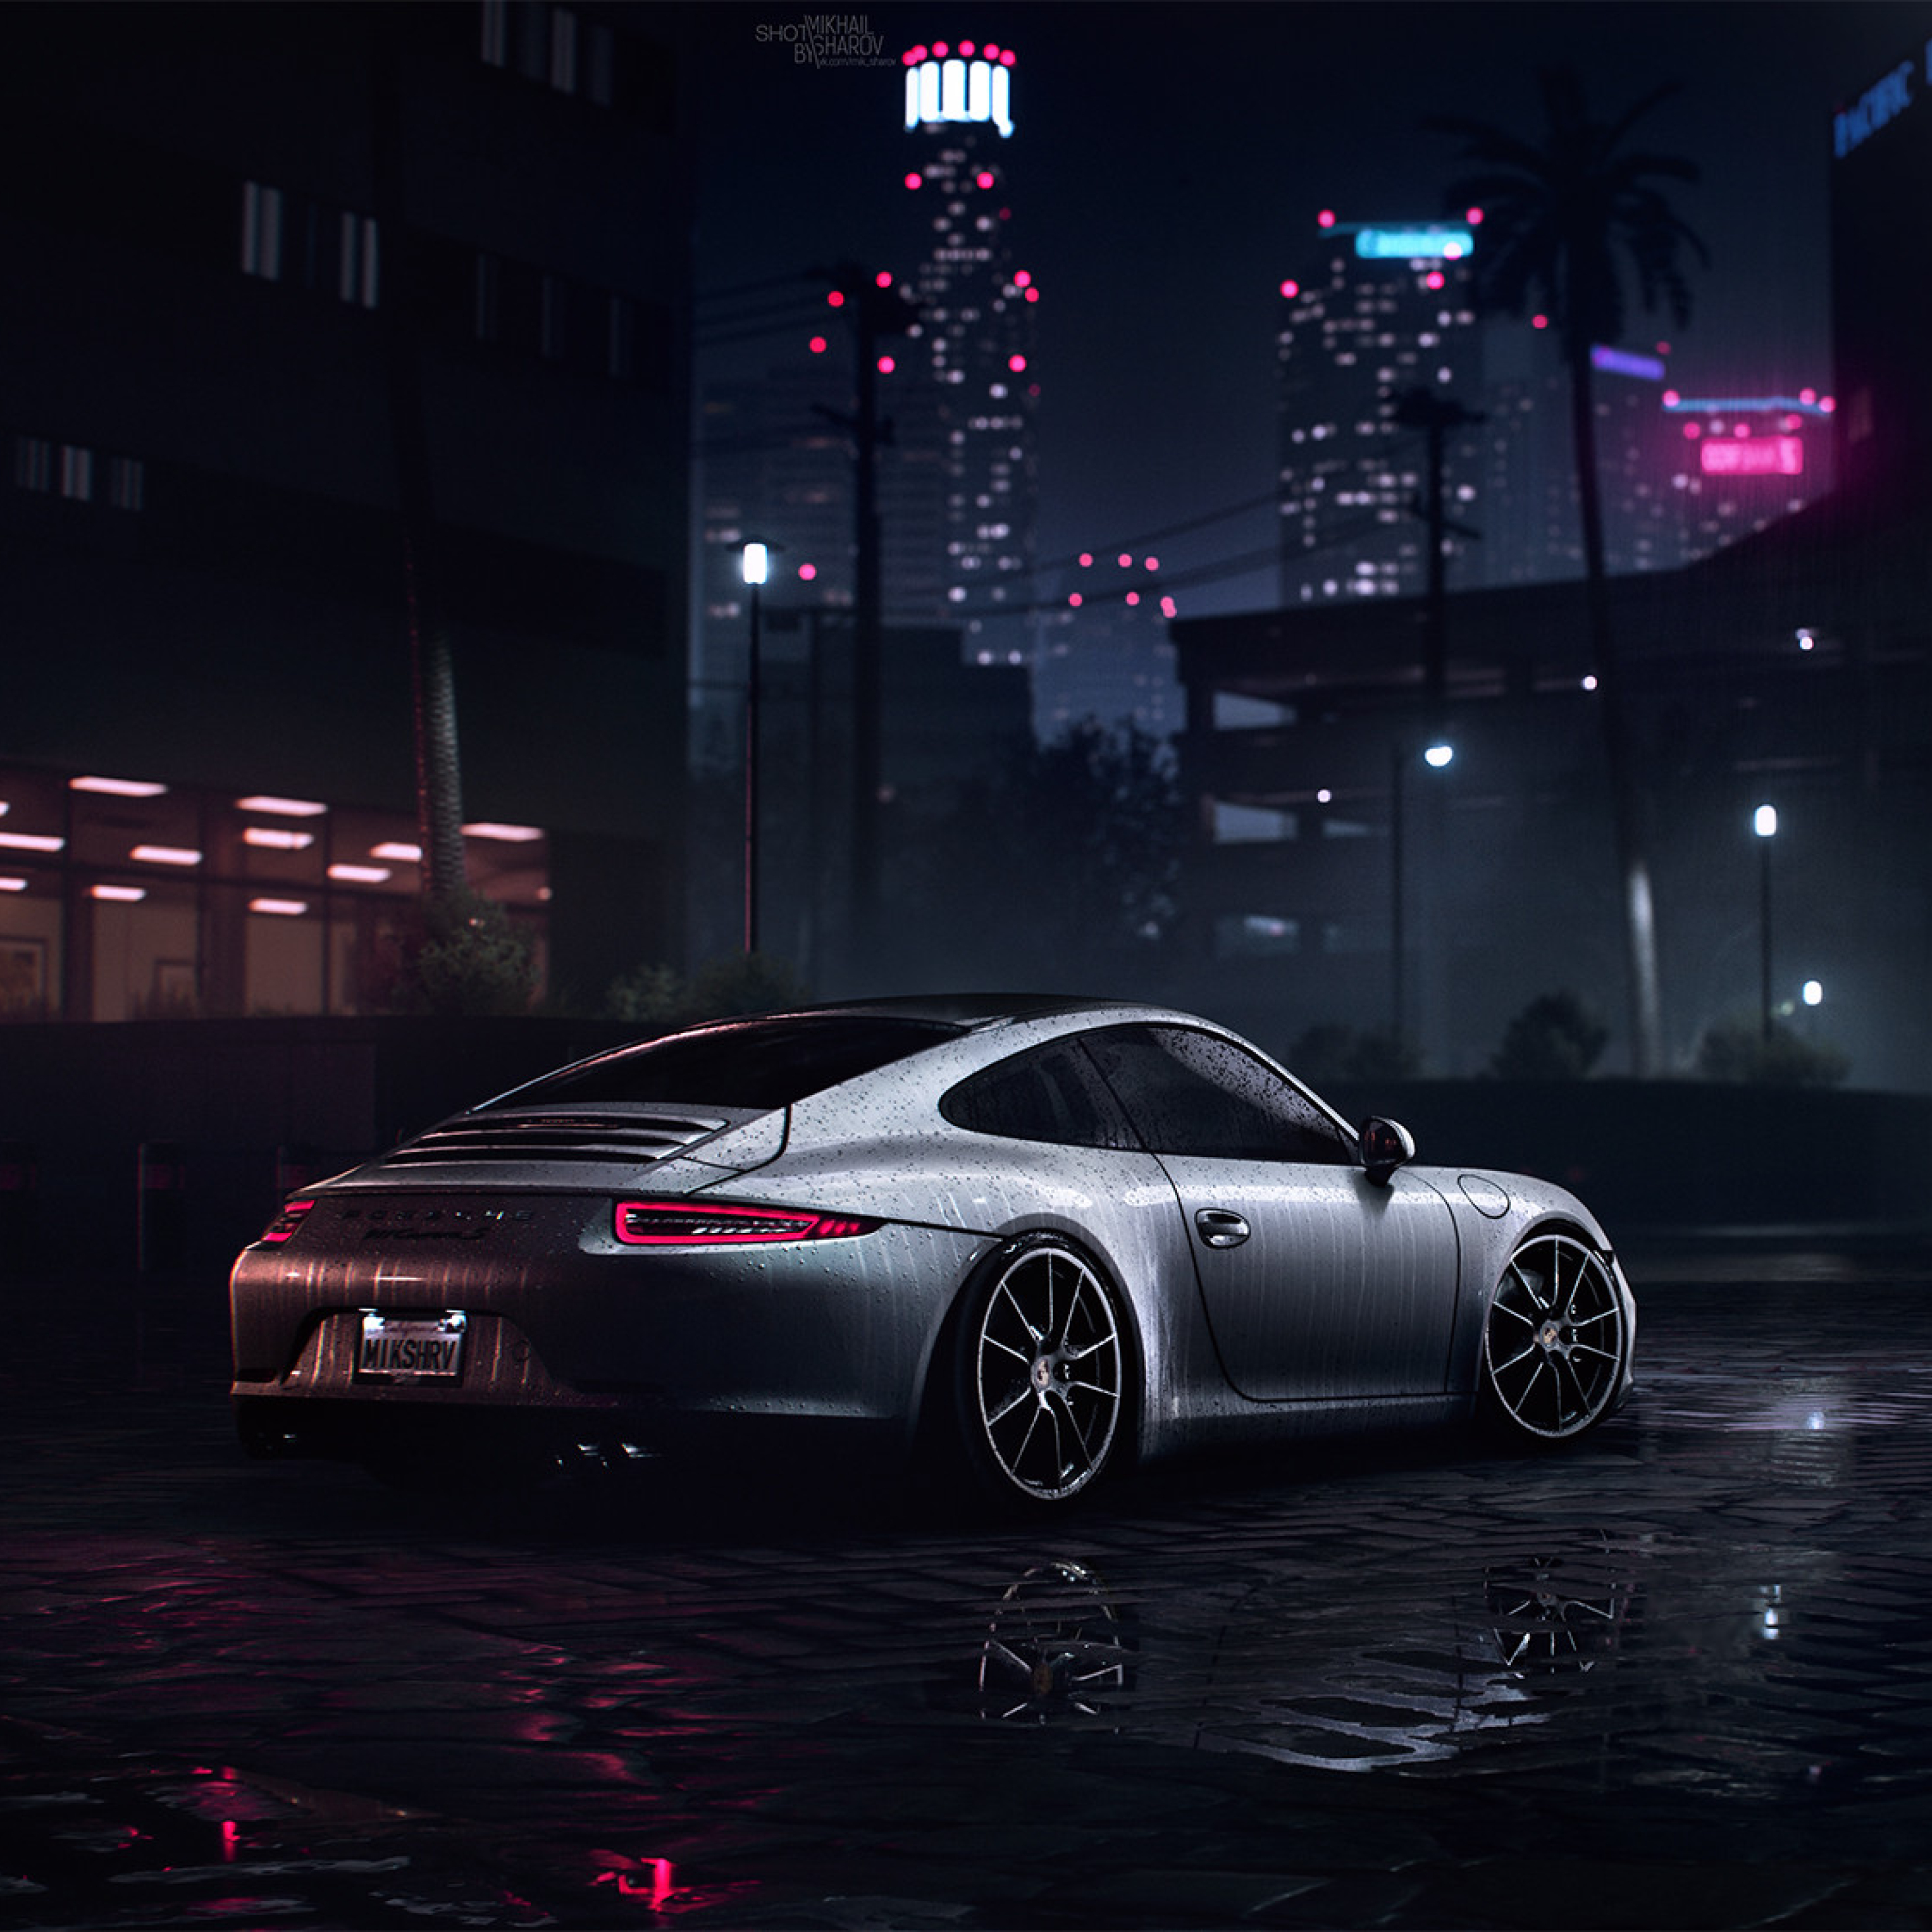 2932x2932 Porsche 911 Carrera S Need For Speed Ipad Pro Retina Display Wallpaper Hd Cars 4k Wallpapers Images Photos And Background Wallpapers Den